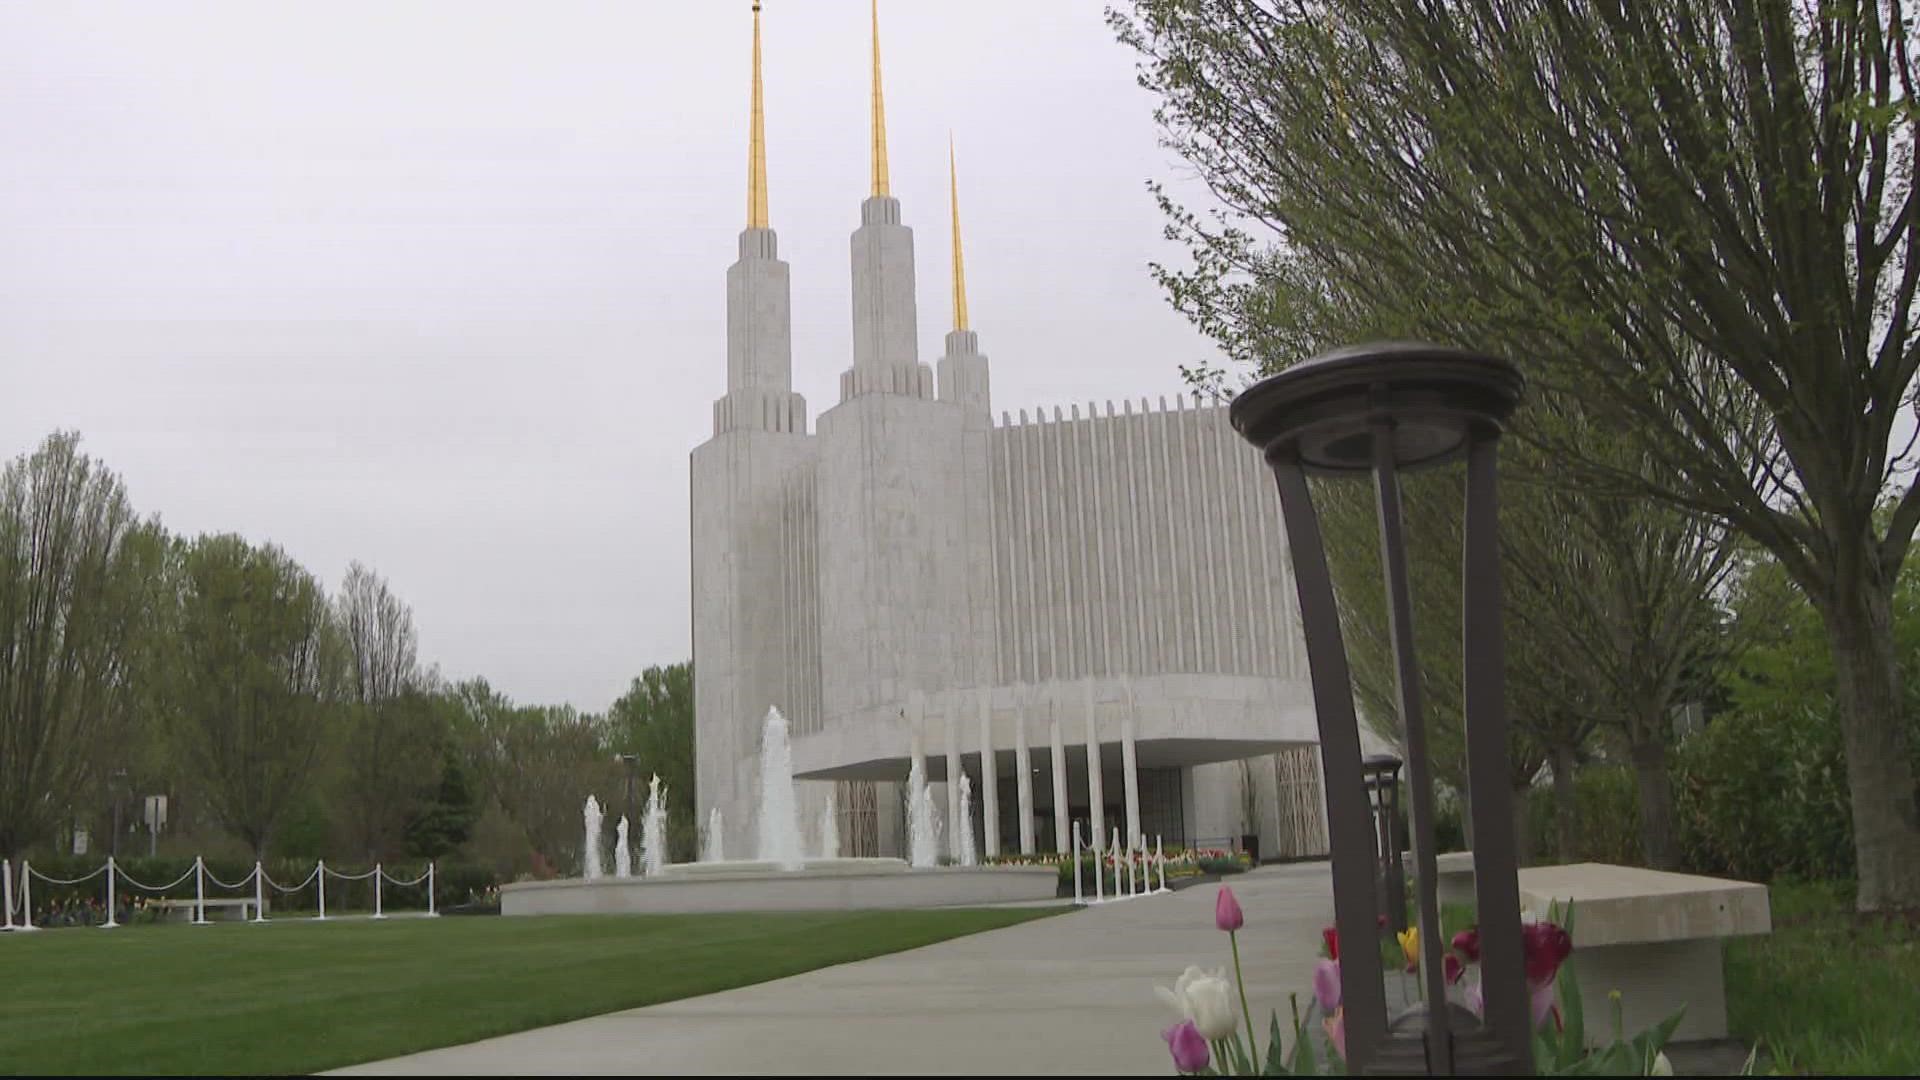 For the first time in nearly 50 years, the public can visit the temple before it is re-dedicated.